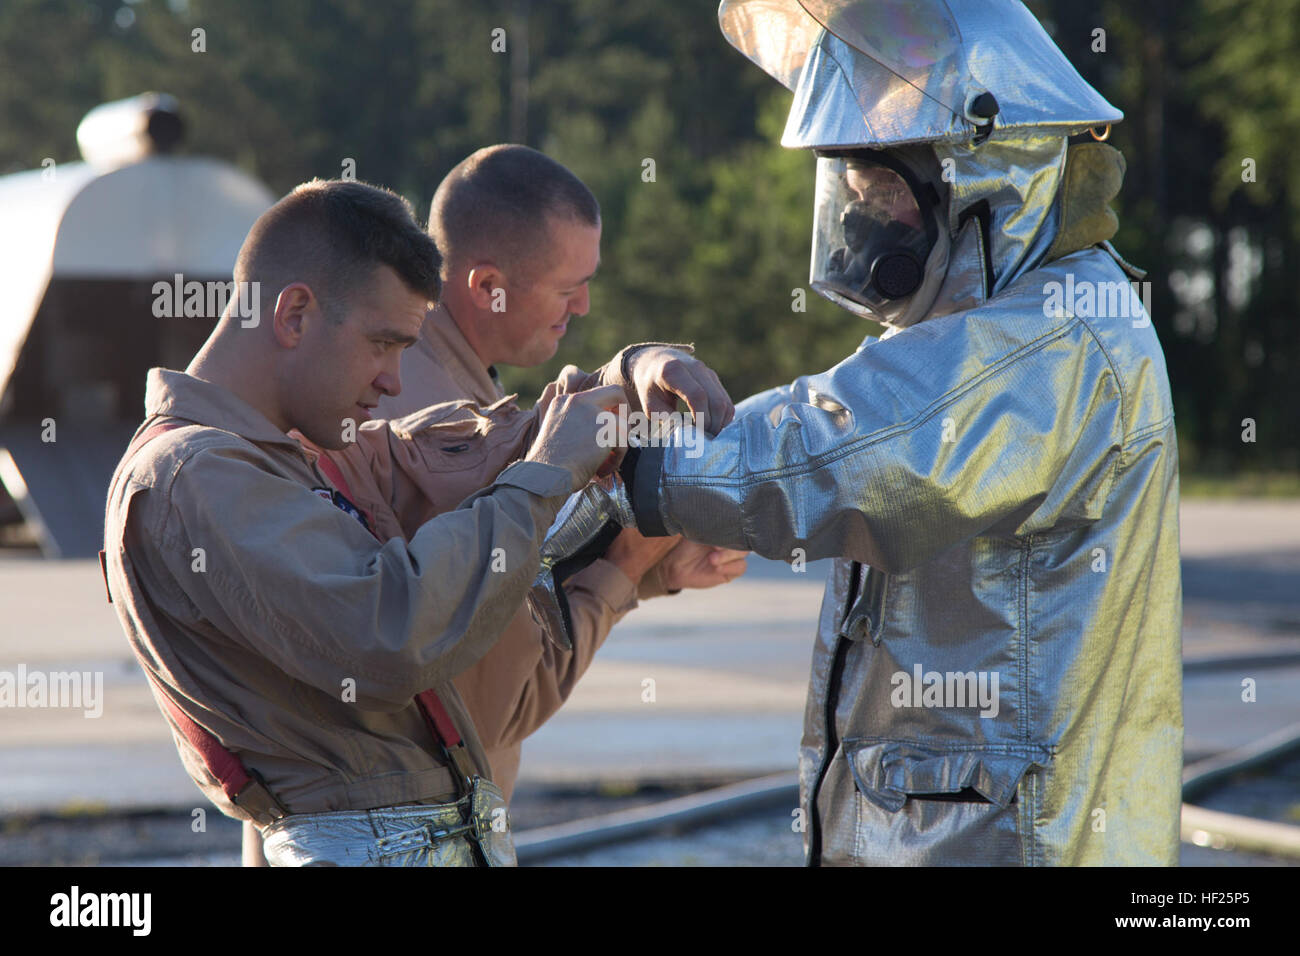 U.S. Marines with Aircraft Rescue and Fire Fighting (ARFF), Headquarters & Headquarters Squadron, Marine Corps Air Station Beaufort, conduct a safety check before beginning their monthly fuel burn training aboard Marine Corps Air Station Beaufort, S.C., May 16, 2014. ARFF conducts monthly fuel burns to ensure all Marines are competent in their occupational specialty and able to be called upon at a moments notice. (U.S. Marine Corps photo by Cpl. Aneshea S. Yee/Released) F-A-18 Fuel Burn Simulation 140516-M-XK446-062 Stock Photo